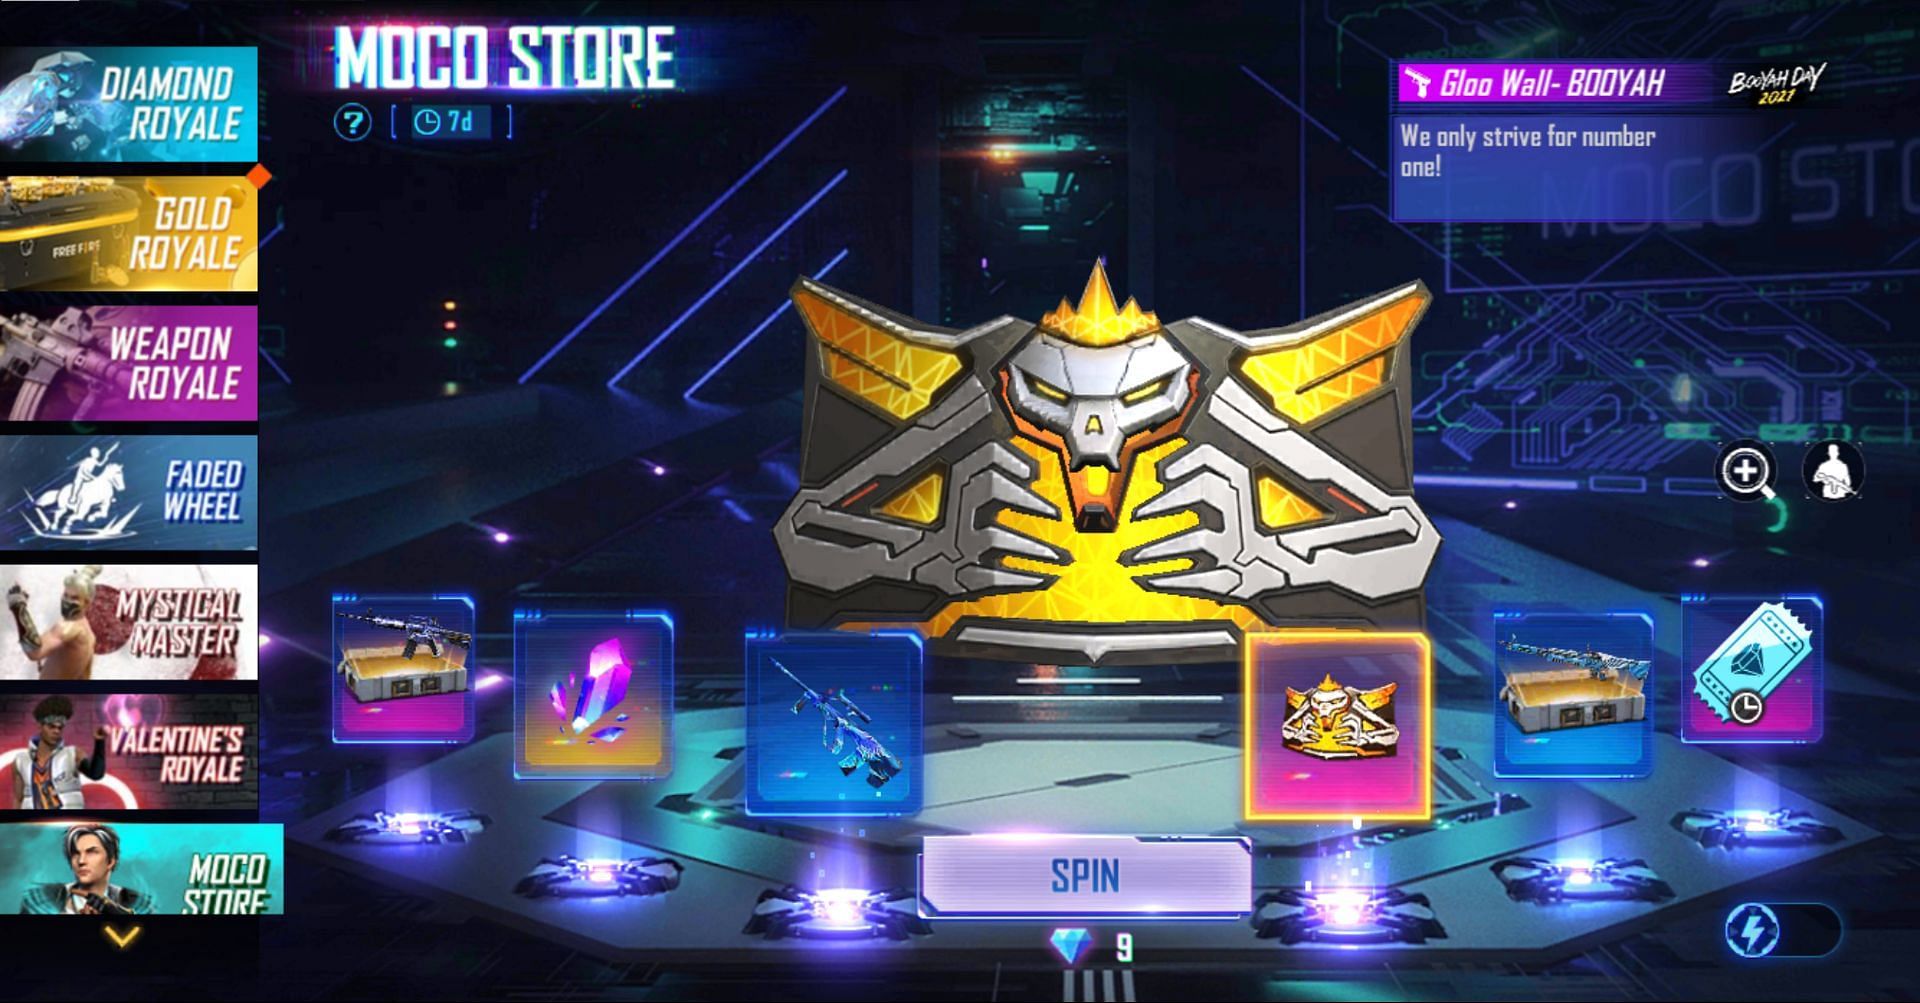 After picking the items, they can perform the spins (Image via Garena)